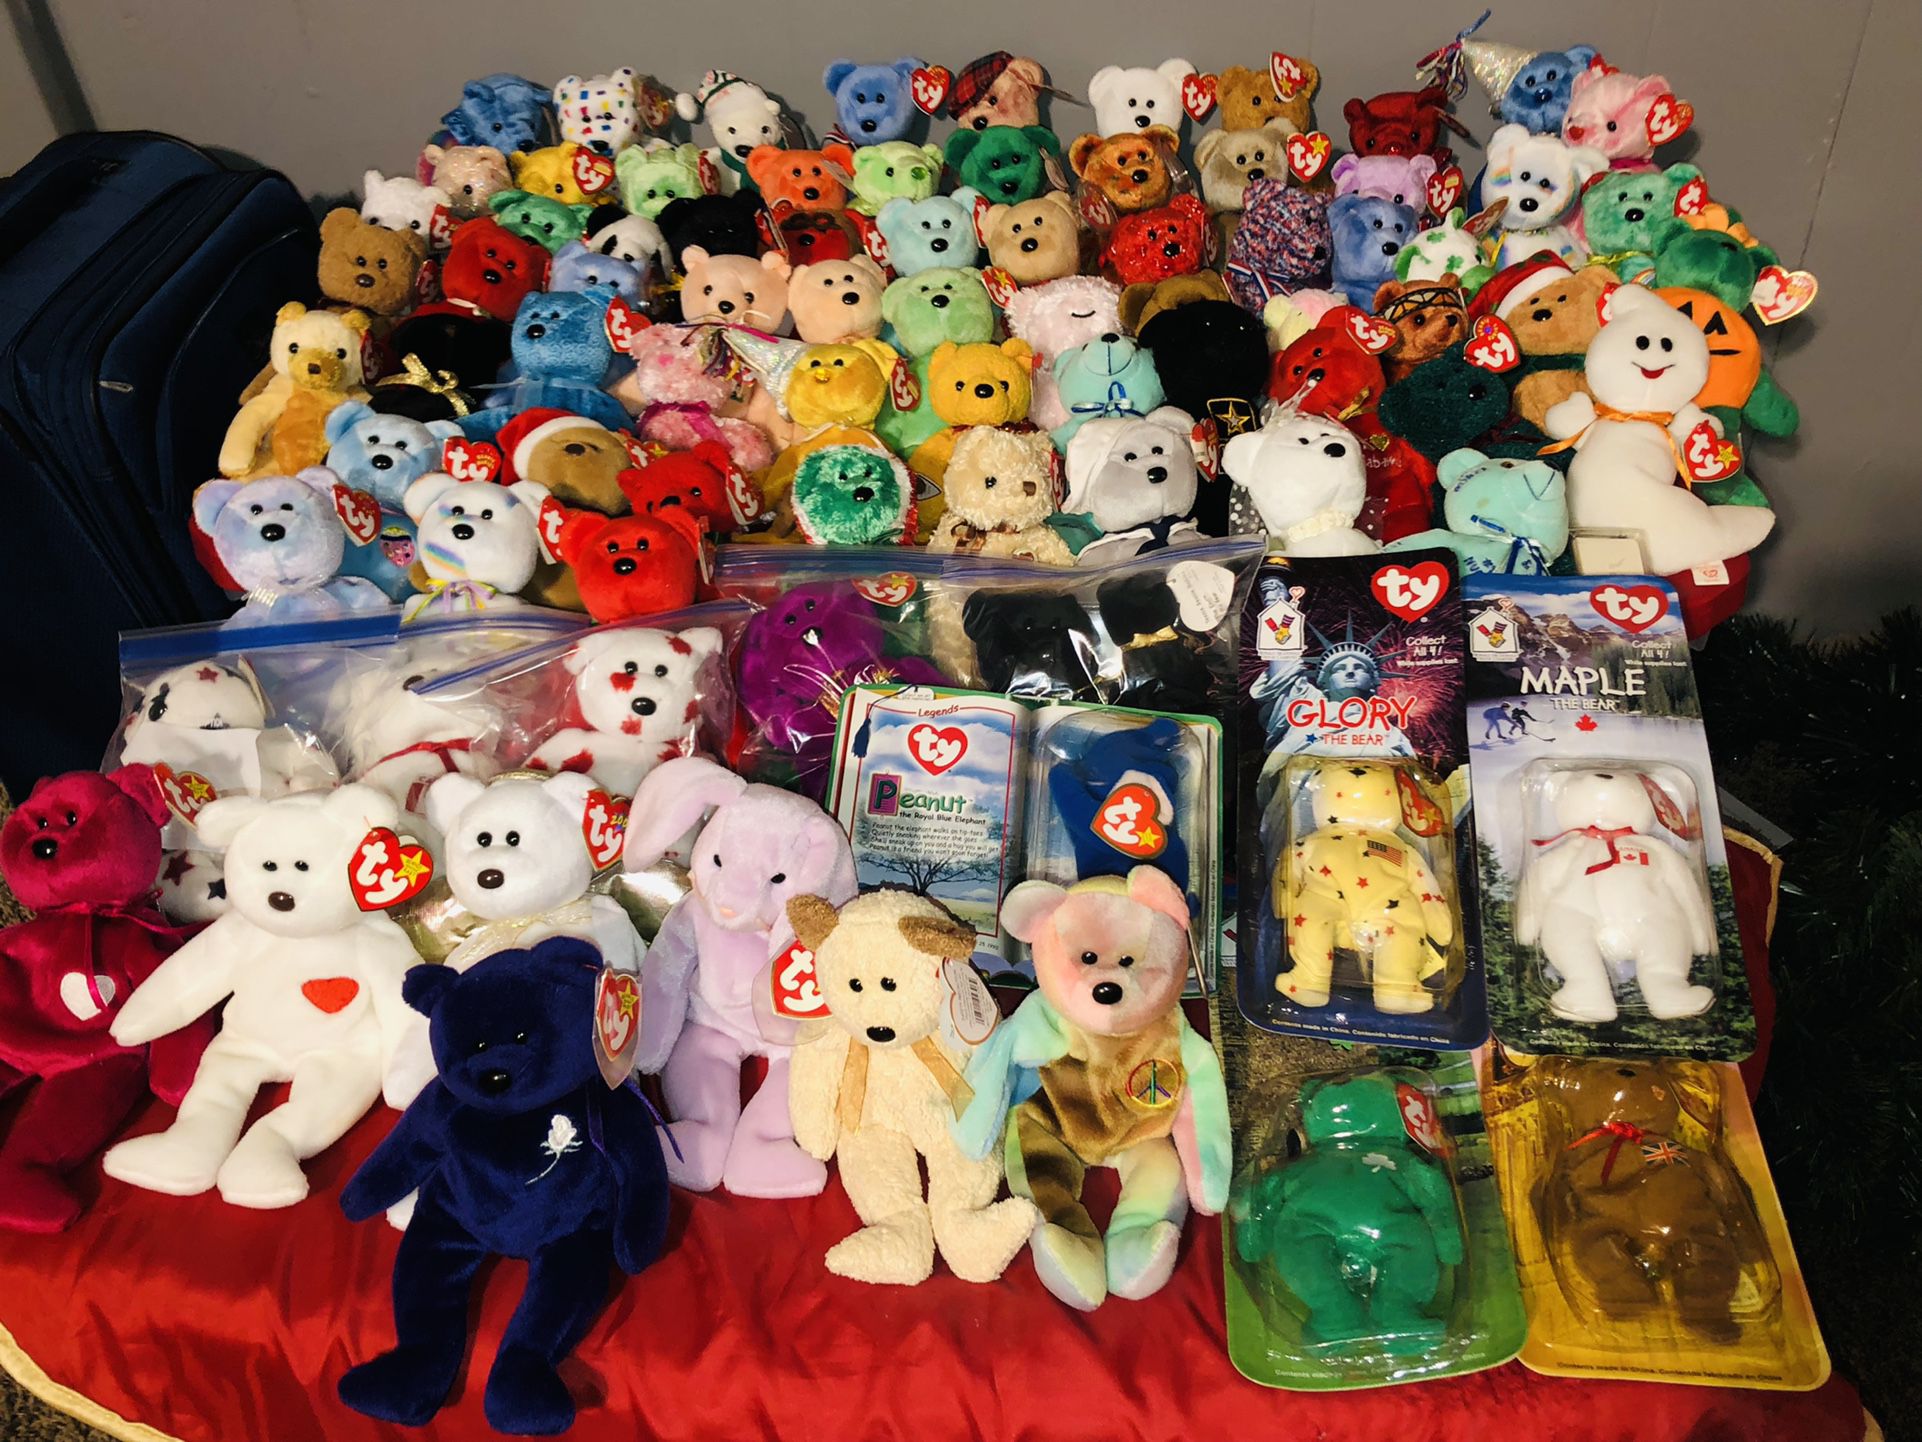 TY Beanie Babies (Collectors Set Of 4 Rare) Also In This